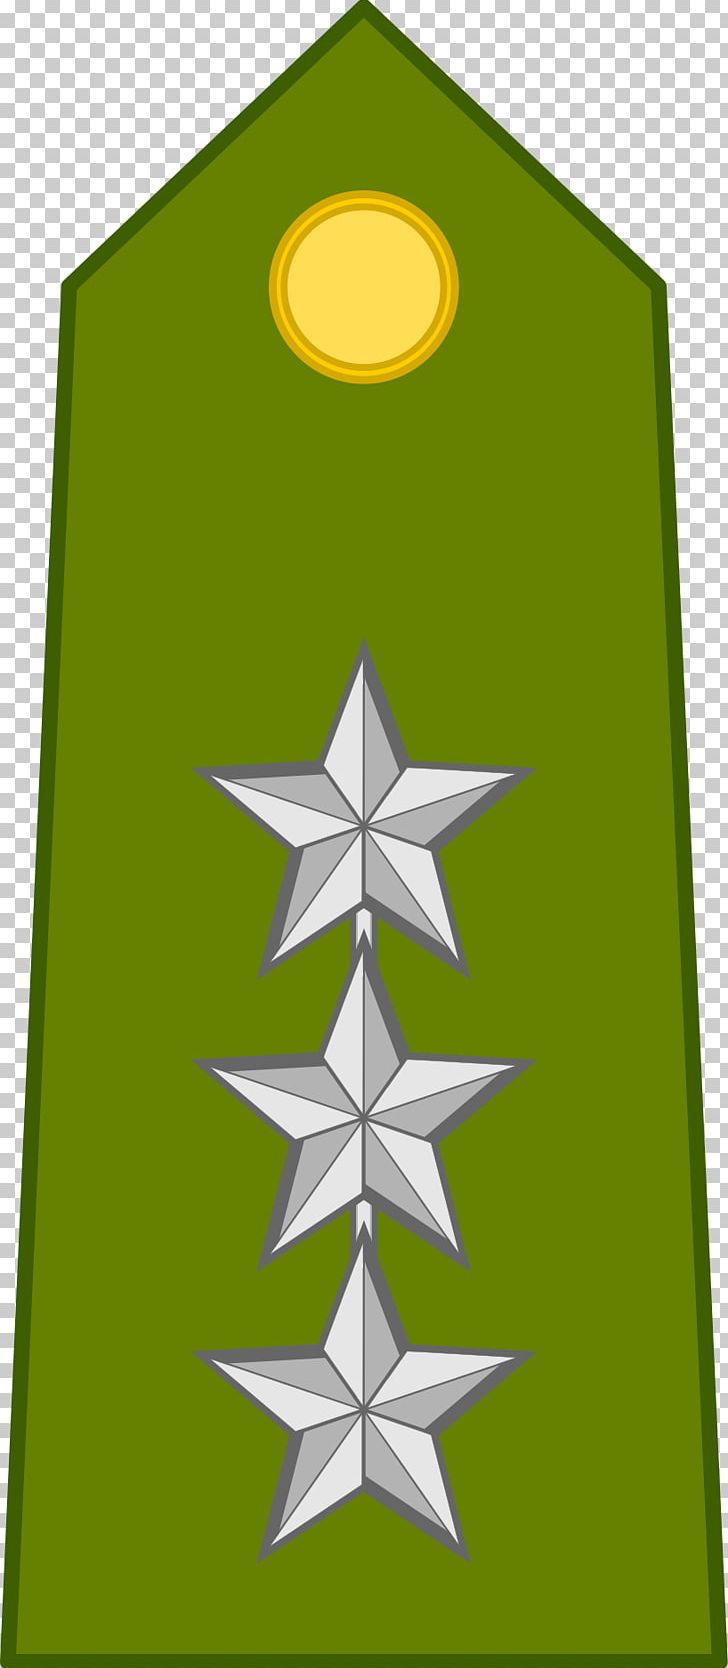 Somalia Somali Air Force Military Somali Armed Forces PNG, Clipart, Air Force, Angle, Christmas Tree, Conifer, Corps Free PNG Download